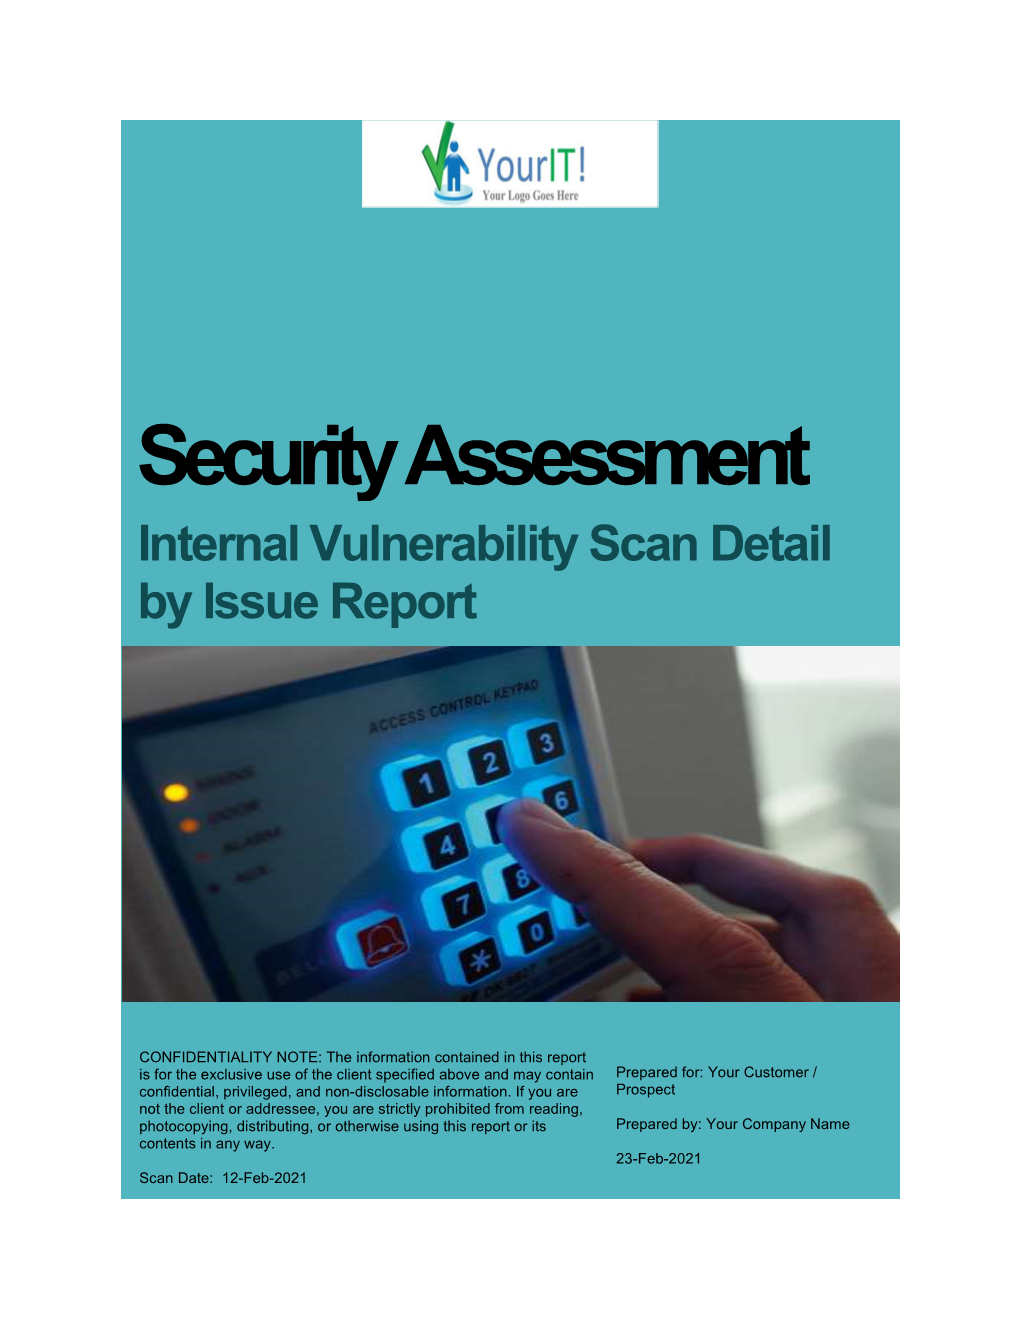 Security Assessment Internal Vulnerability Scan Detail by Issue Report